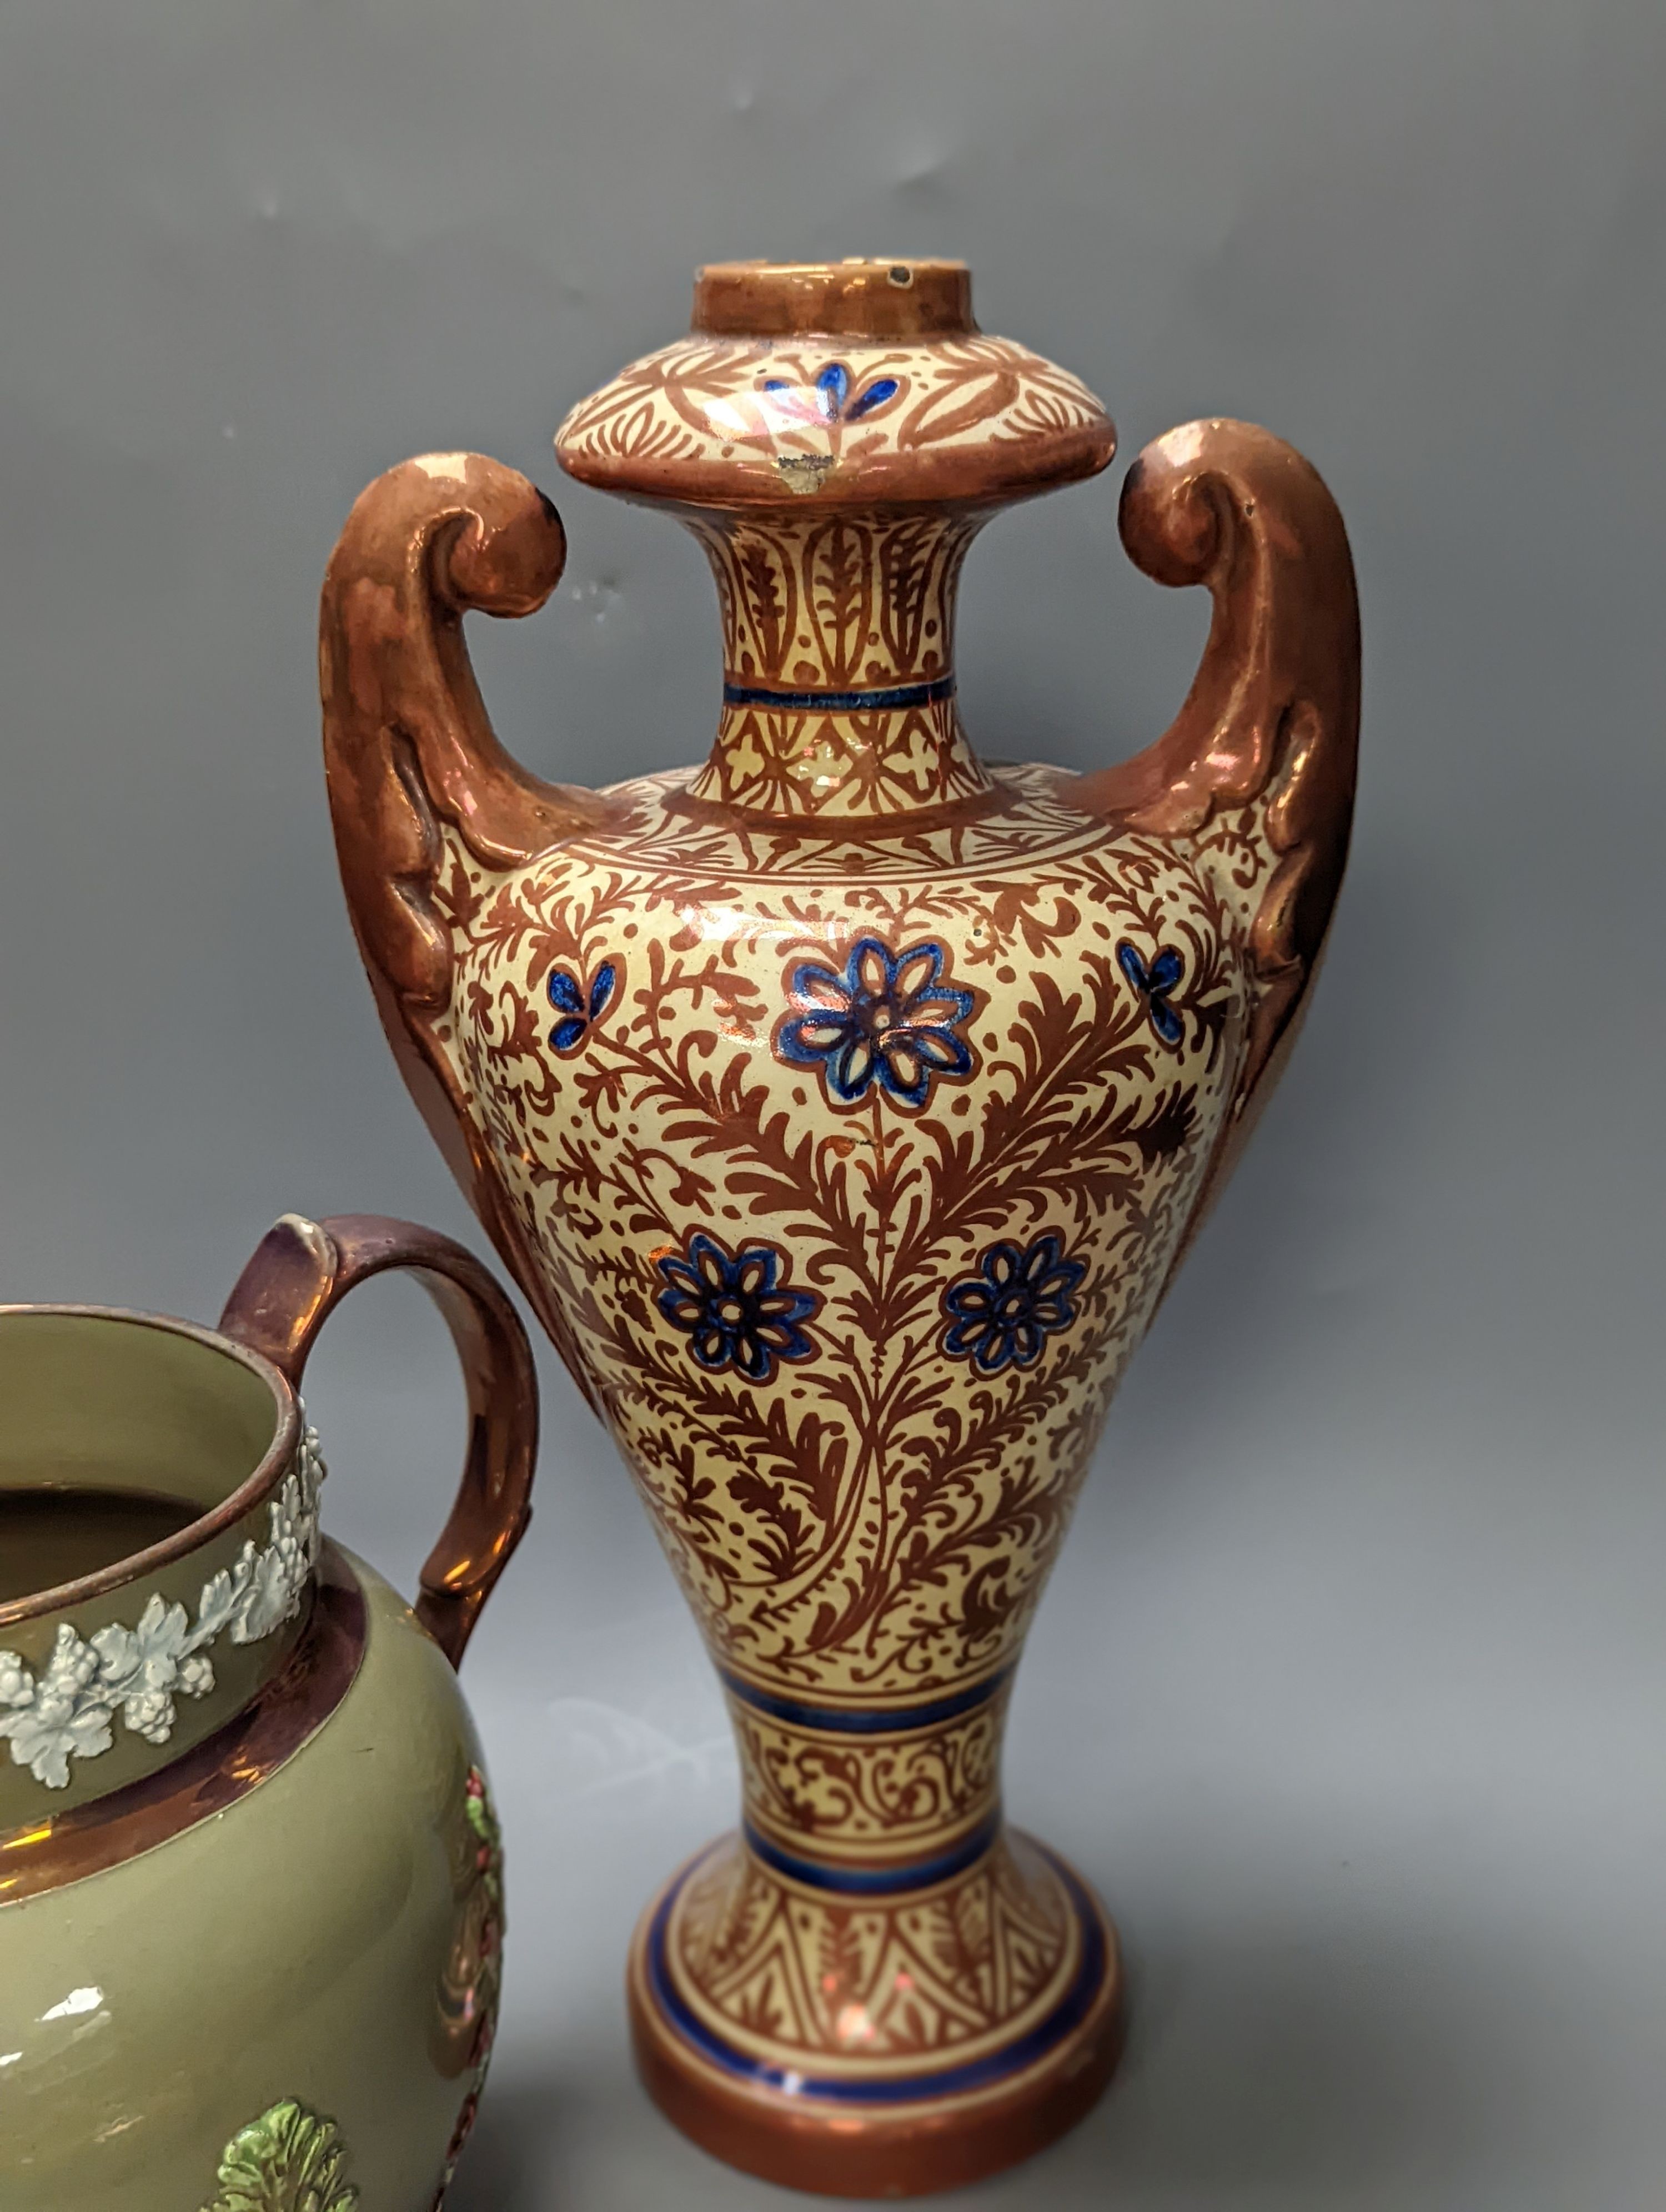 A Burley ware lustre dragon bowl, a lustre and fox glove designed jug and a Hispano-Moresque style copper lustre vase, Vase 38 cms high.